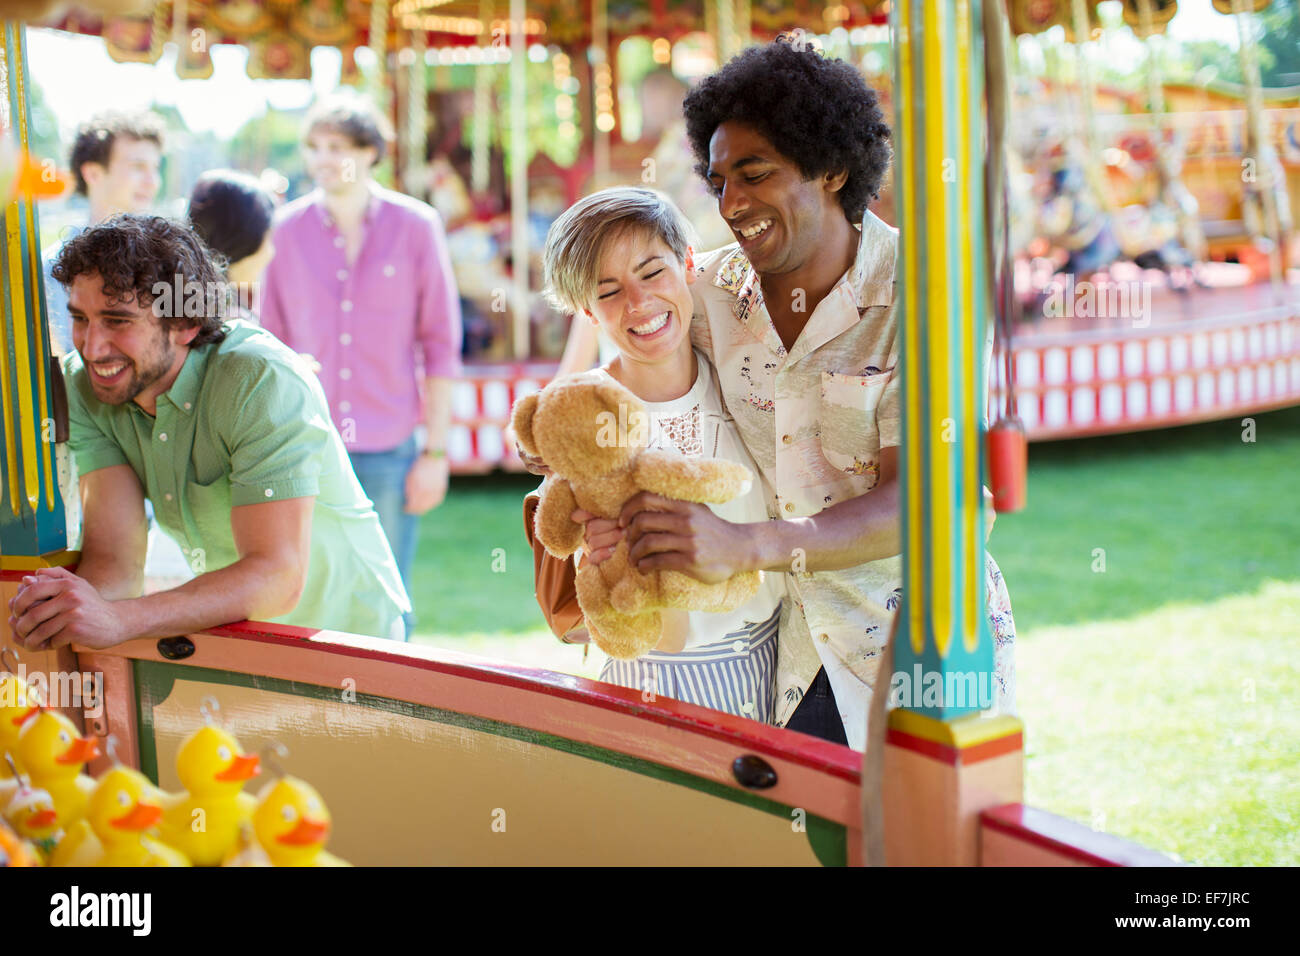 Smiling couple holding teddy bear next to fishing game in amusement park Stock Photo